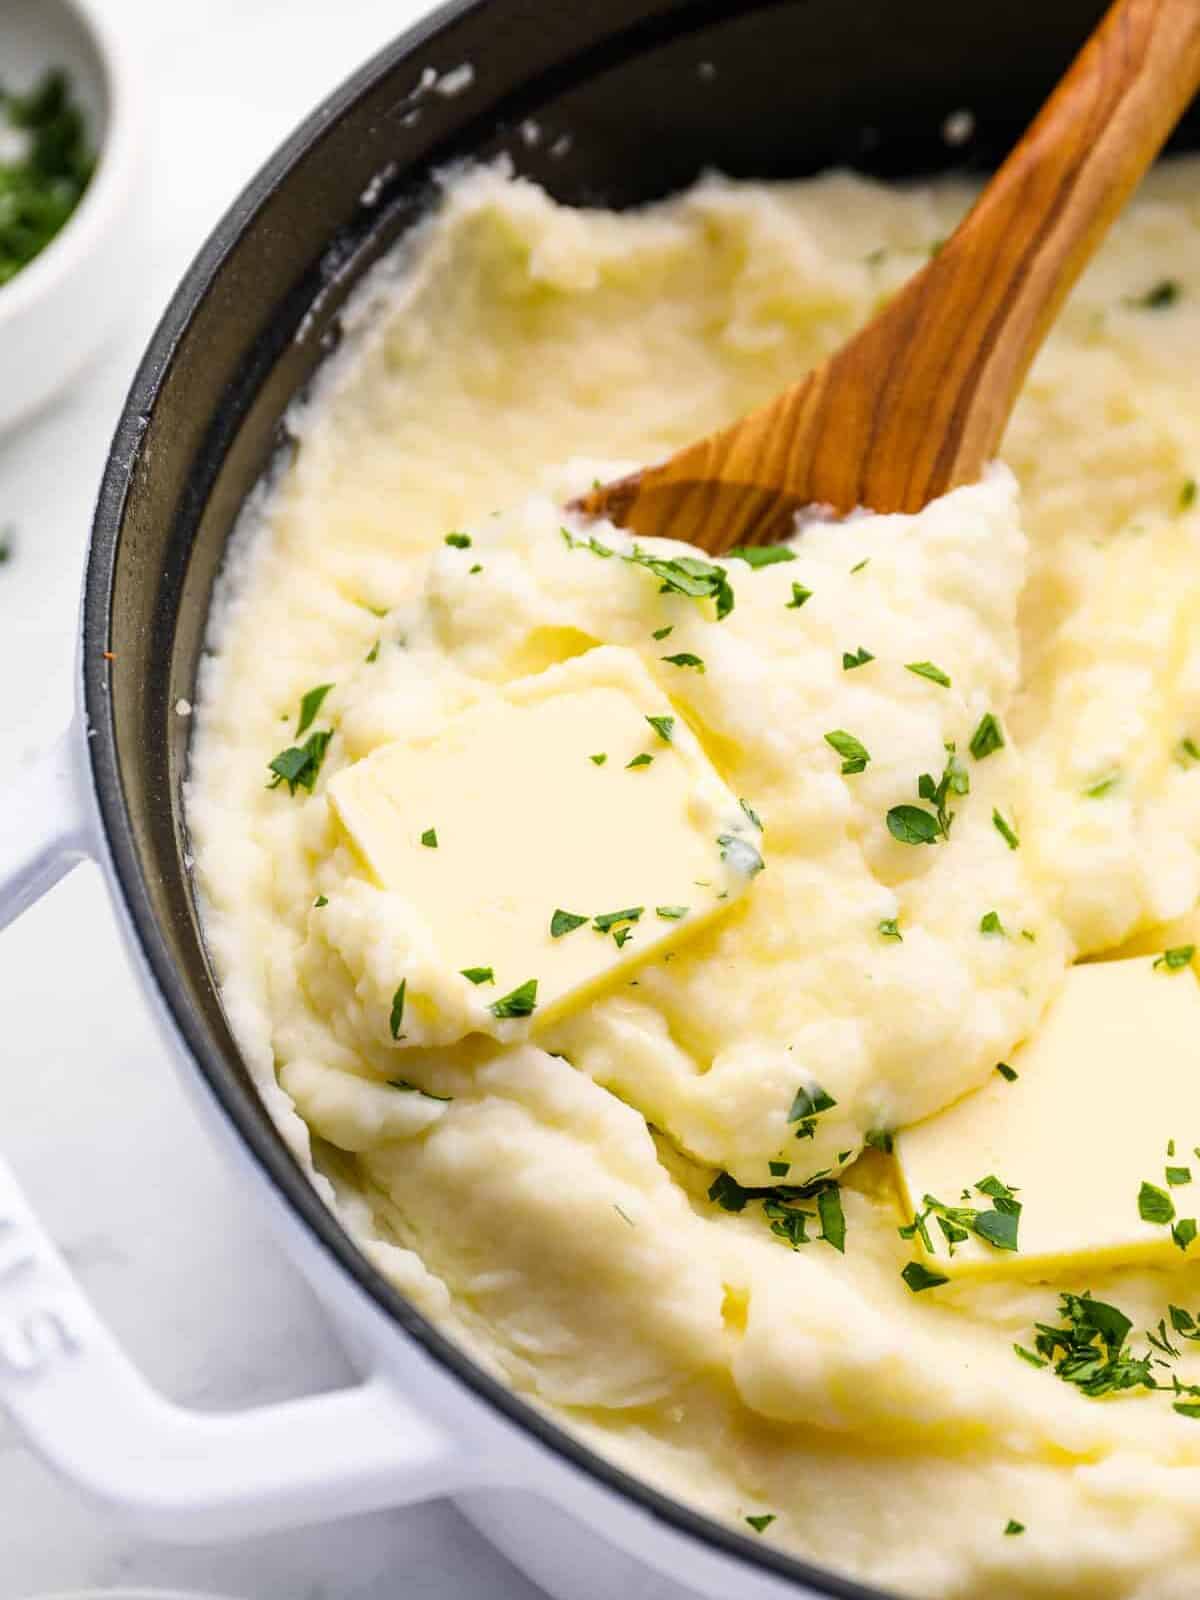 mashed potatoes in a cast iron skillet with a wooden spoon.